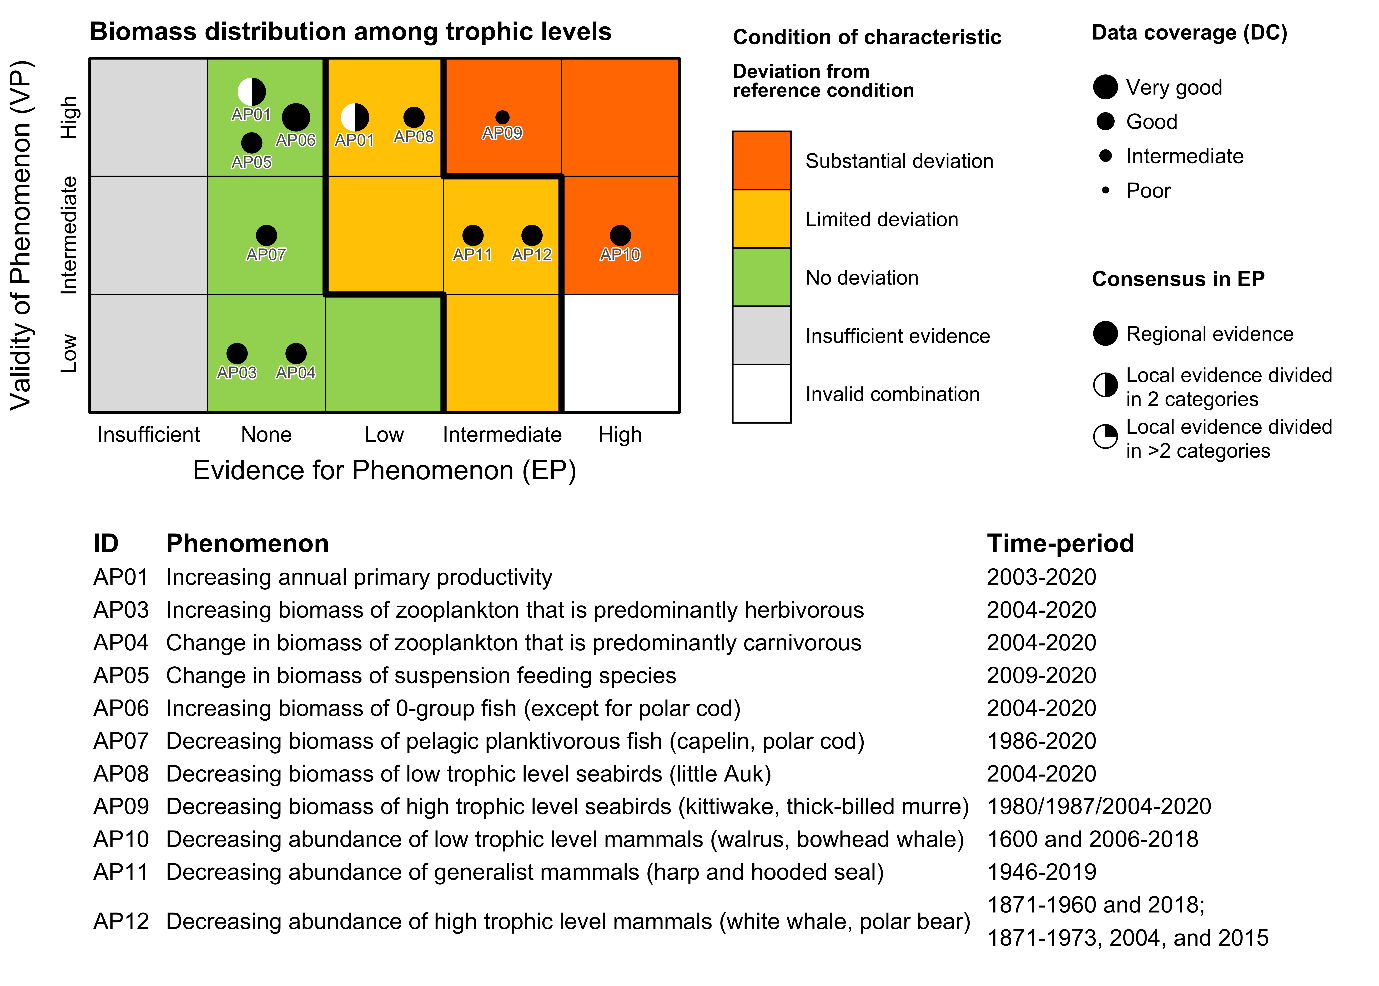 Figure 7.3.1a(ii): The PAEC assessment diagram for the Biomass among trophic levels ecosystem characteristic of the Arctic part of the Barents Sea.